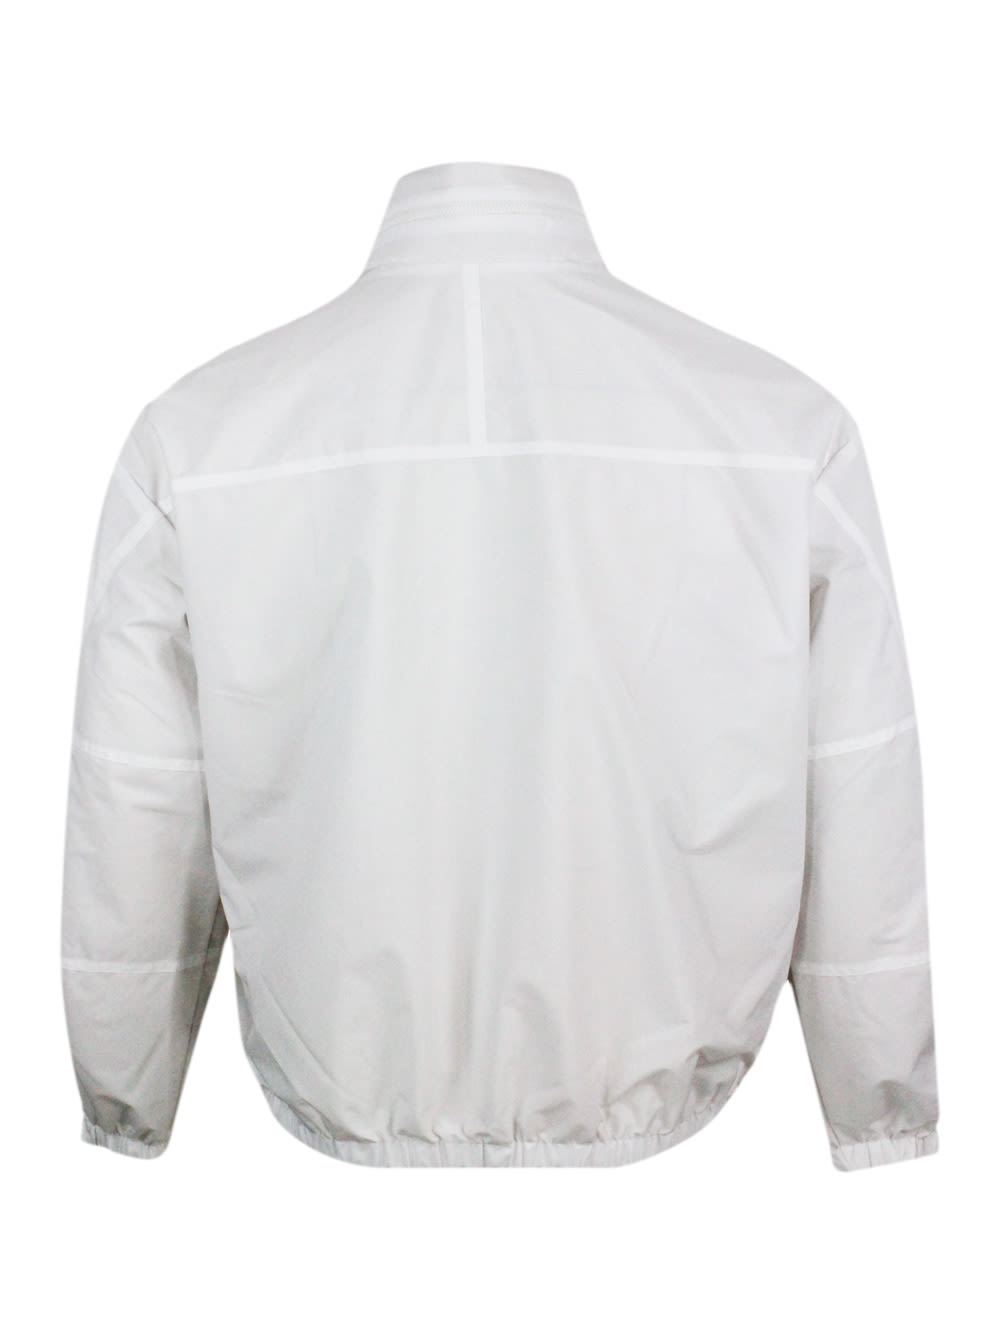 Shop Armani Collezioni Reversible Windproof Jacket In Light Technical Fabric, Milano Edition Line, Zip Closure And Conceale In White